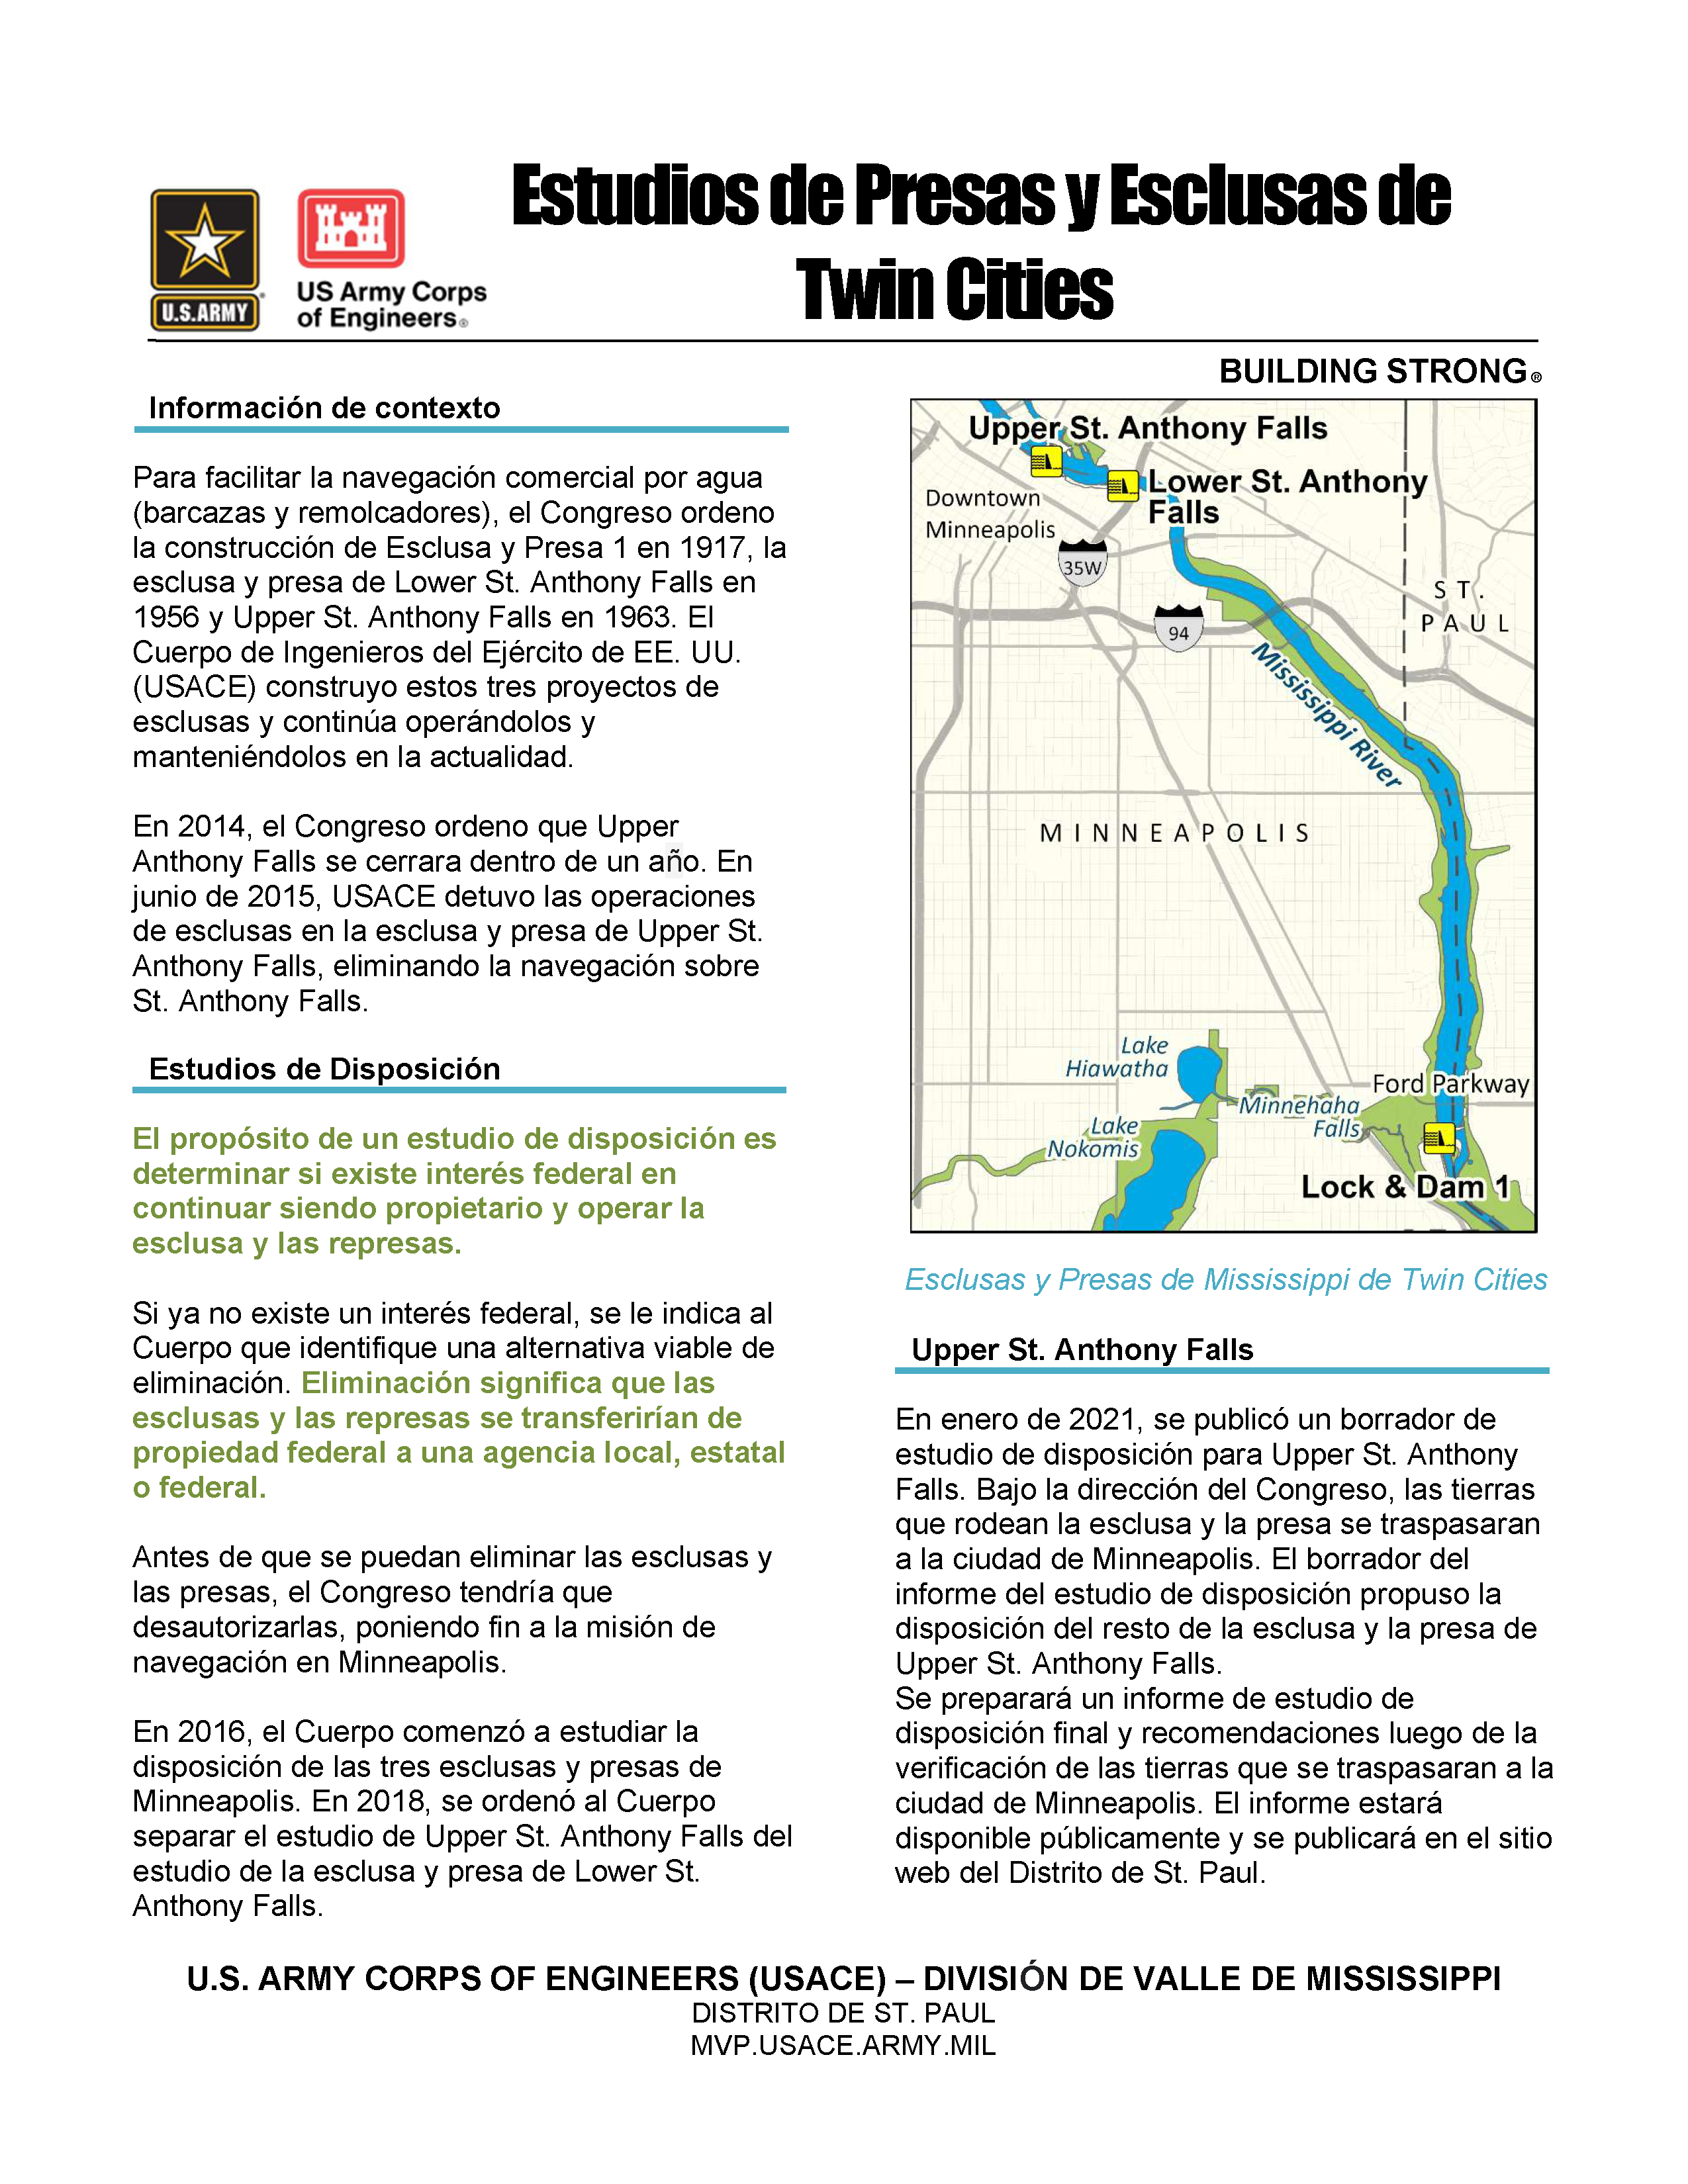 Twin Cities disposition study in Spanish